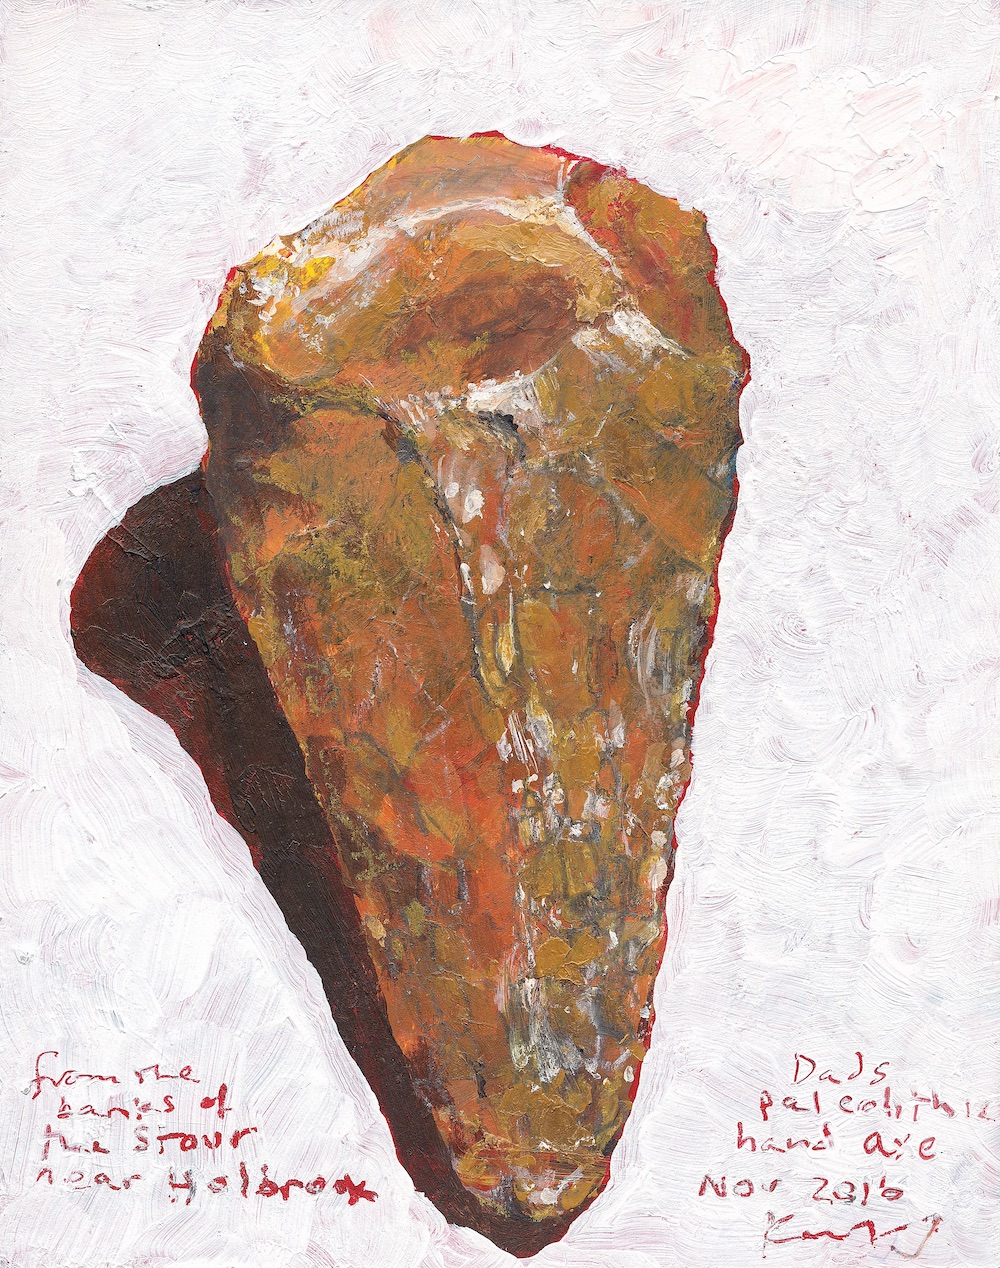 Kurt_Jackson_M45ST45_Dad's_Paleolithic_hand_axe_from_the_banks_of_the_Stour_2016_Mixed_media_on_museum_board_21x16cm